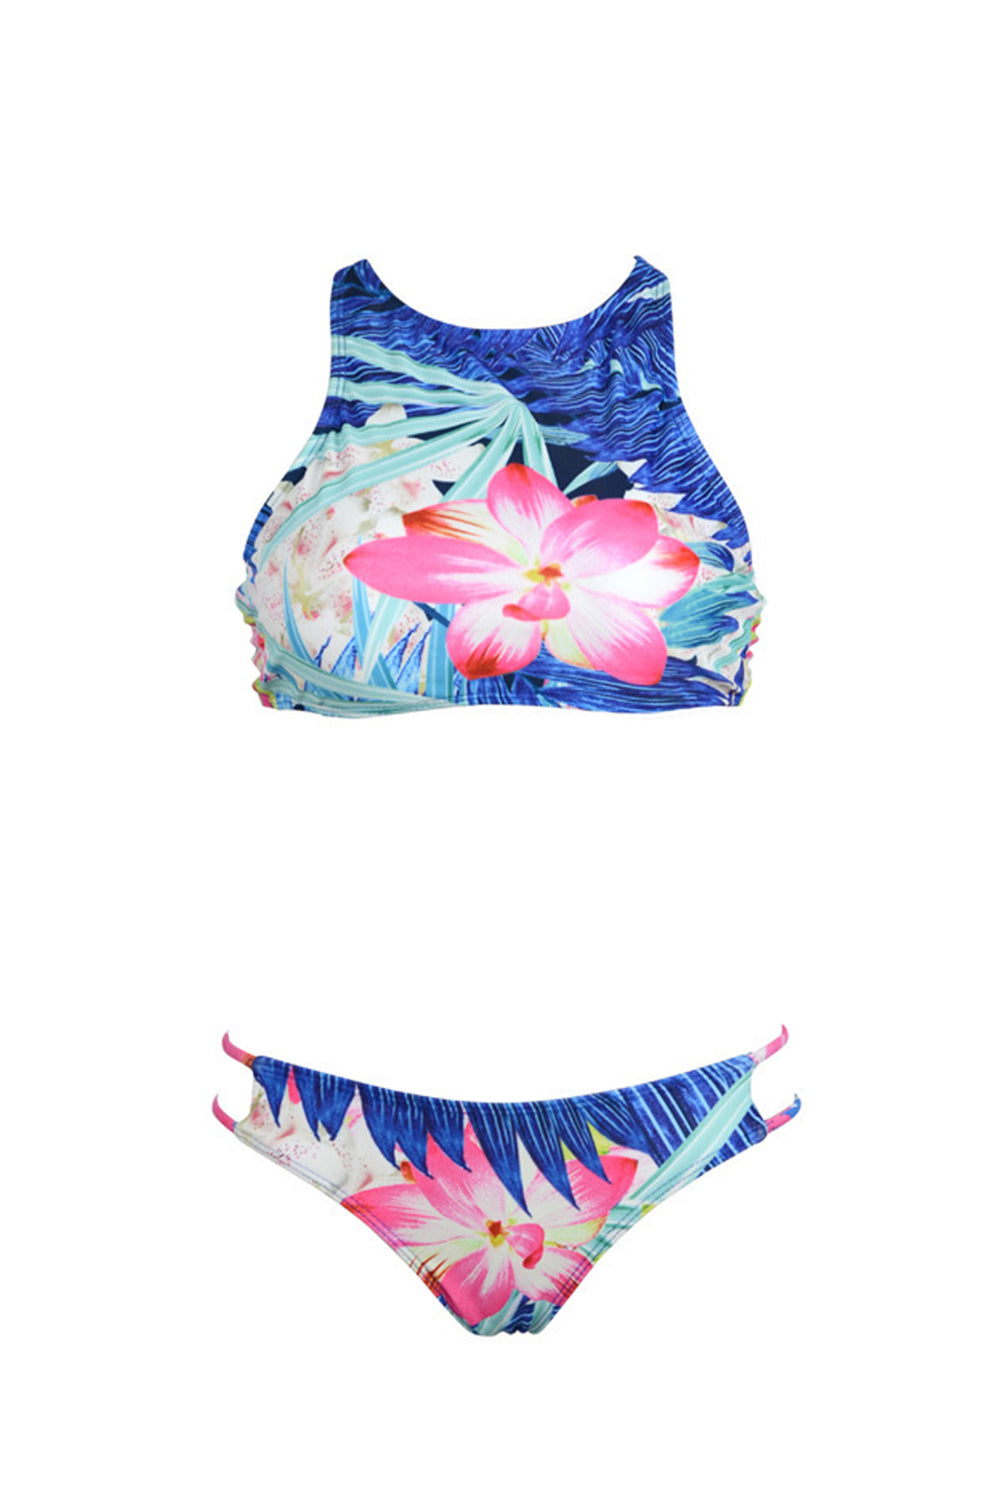 Iyasson Floral Printing Trendy Sport Style High Neck Bikini Top with Double-string Bottom